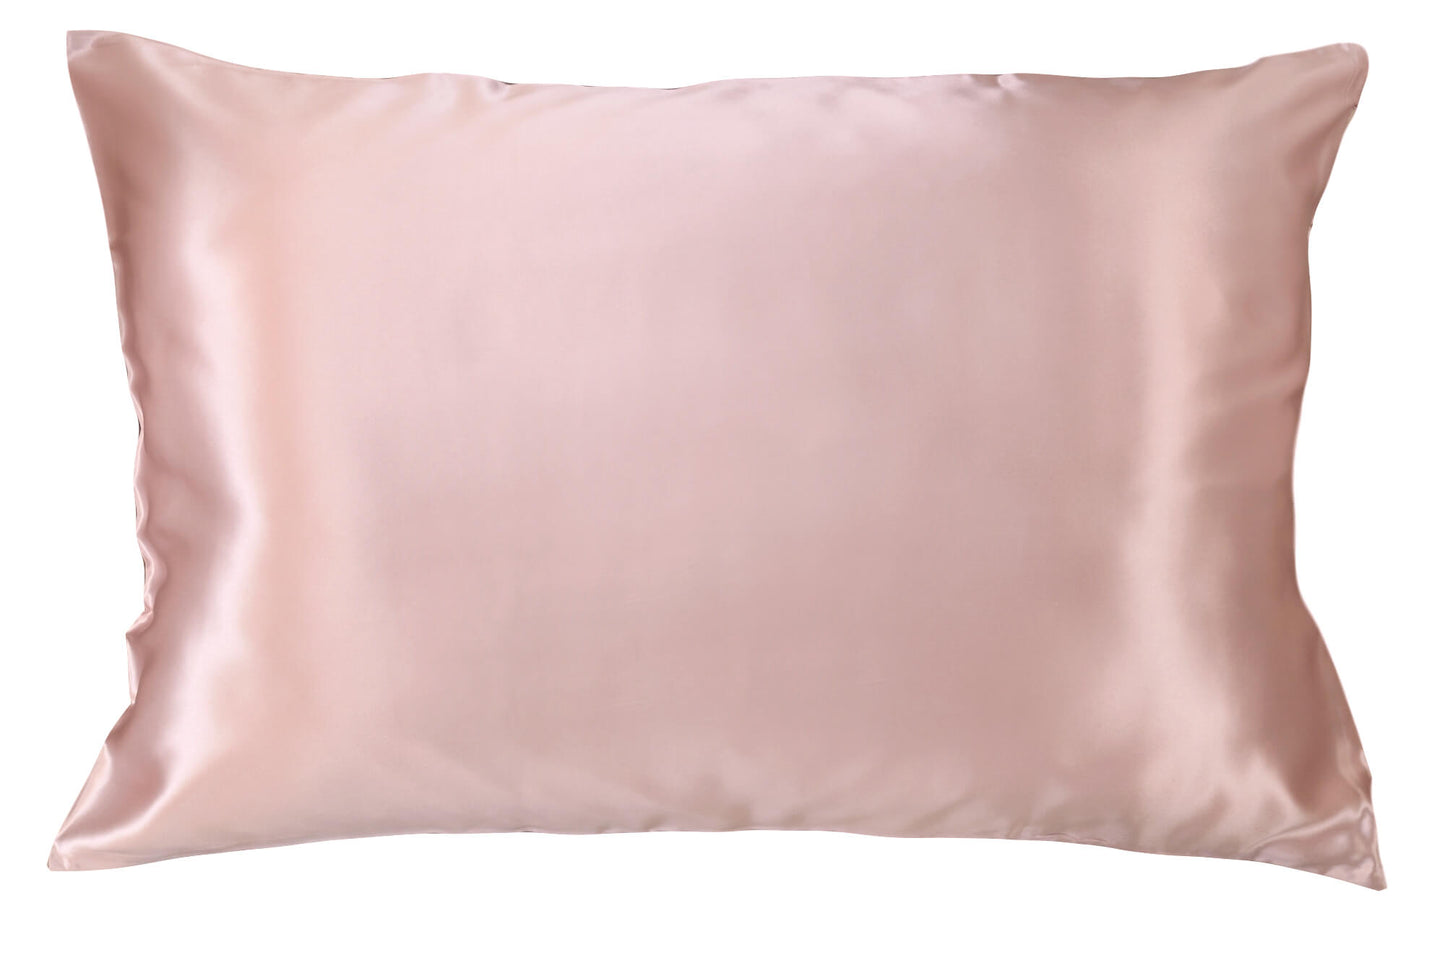 25 Momme Silk Pillowcase - King Vintage Pink Zipper Closure - Outlet